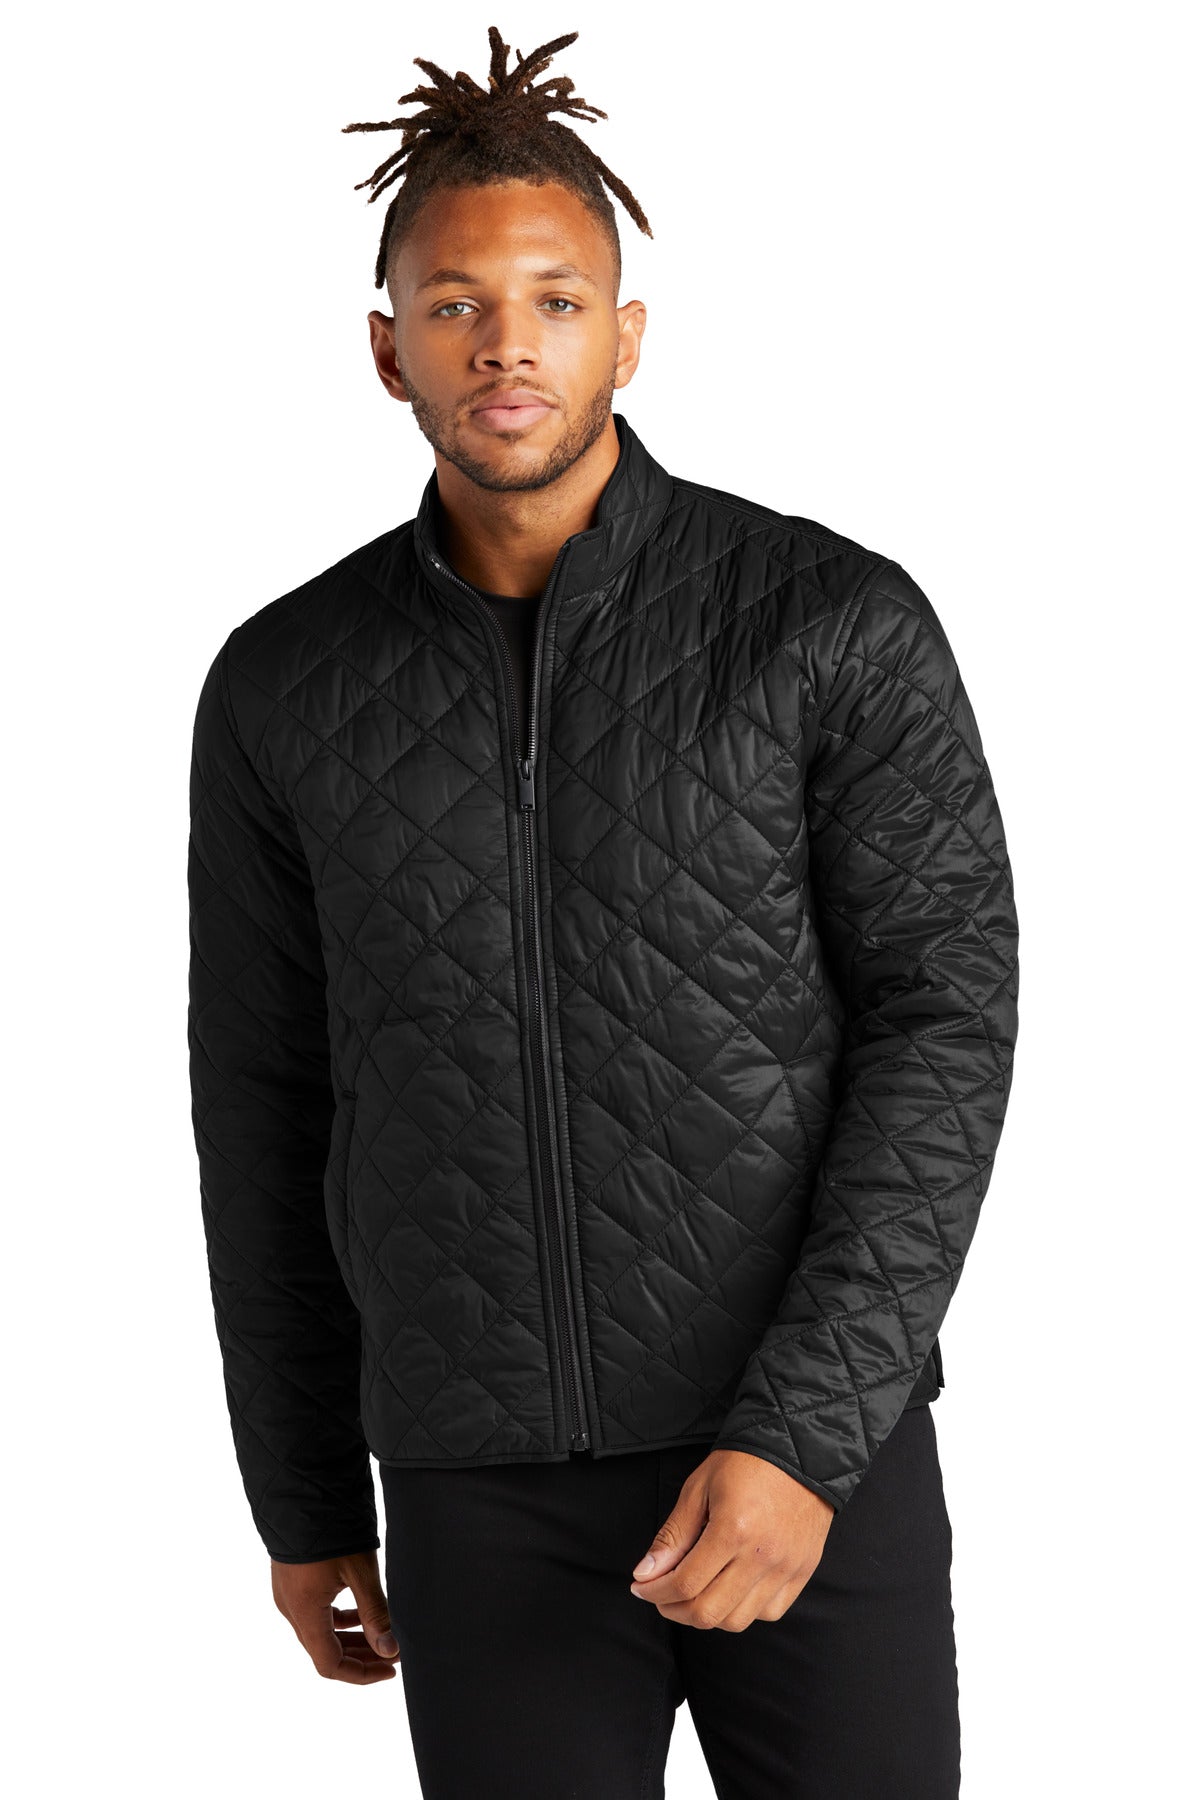 Mercer+Mettle™ Quilted Full-Zip Jacket MM7200 - DFW Impression